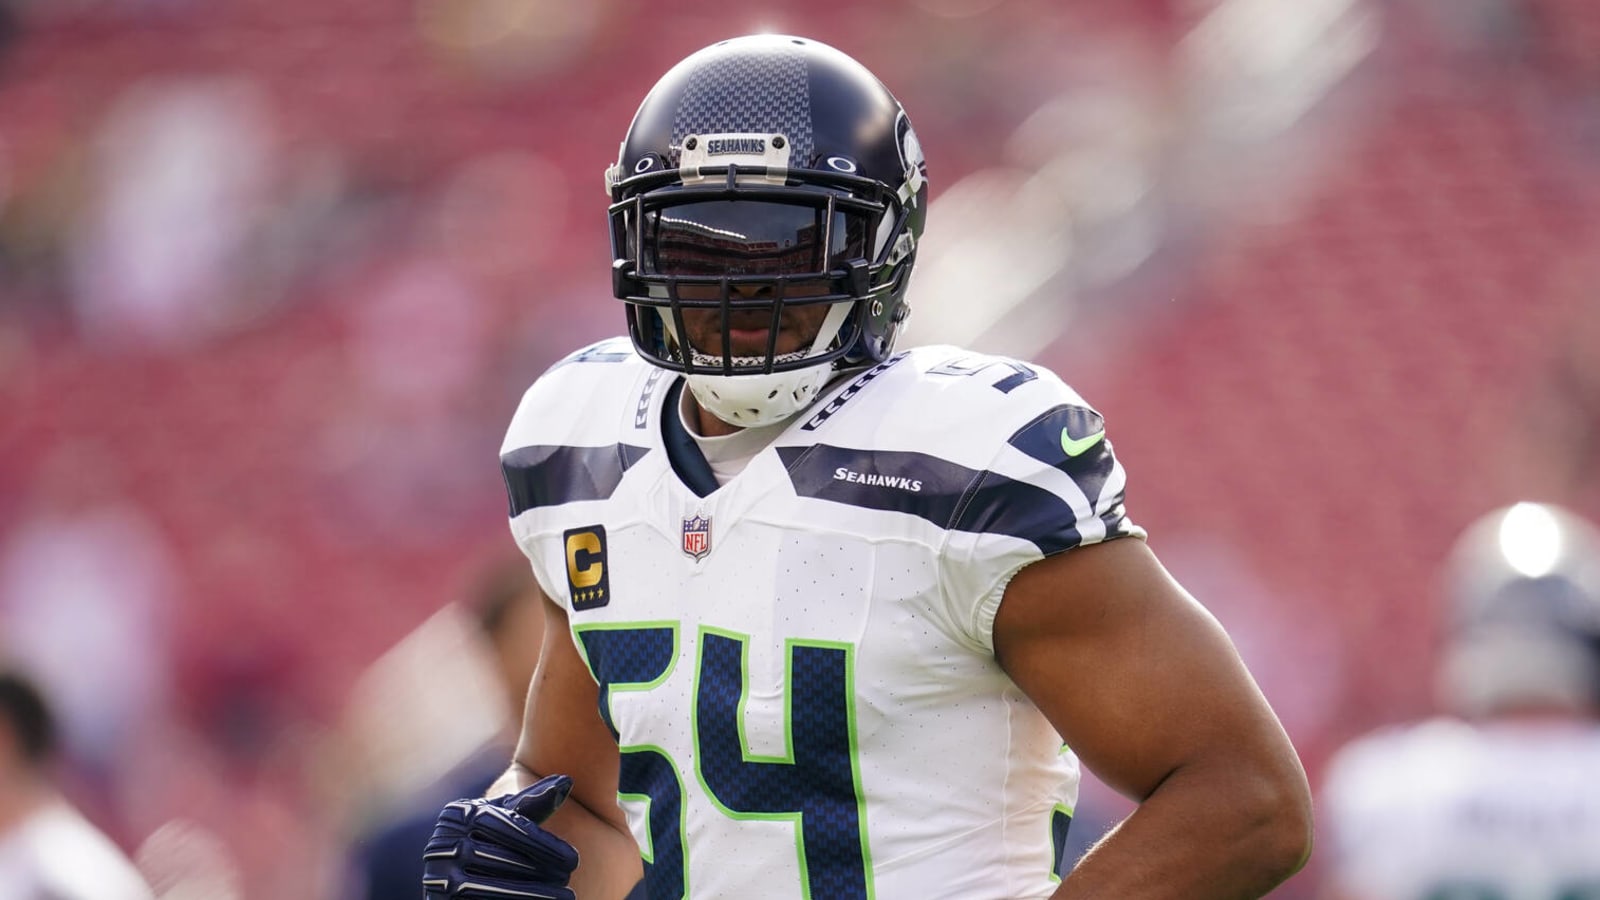 Seahawks' Bobby Wagner discusses plans for next season